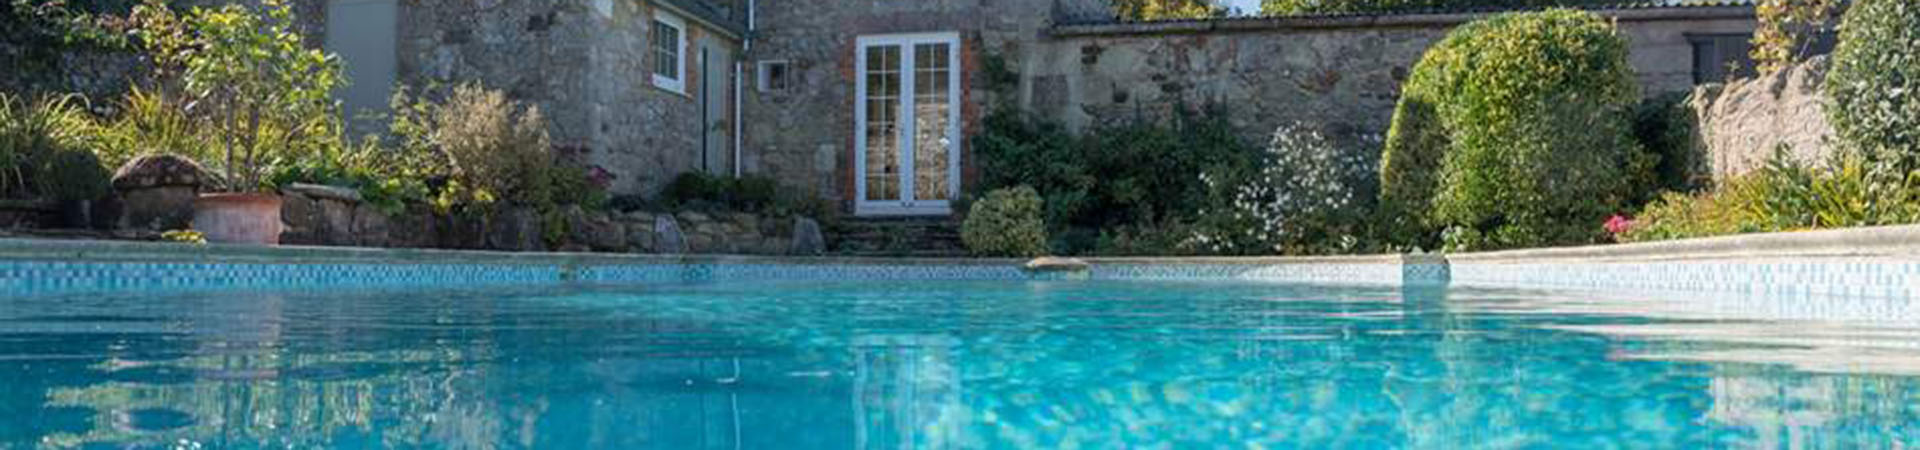 Holiday cottages with pools in North Cornwall